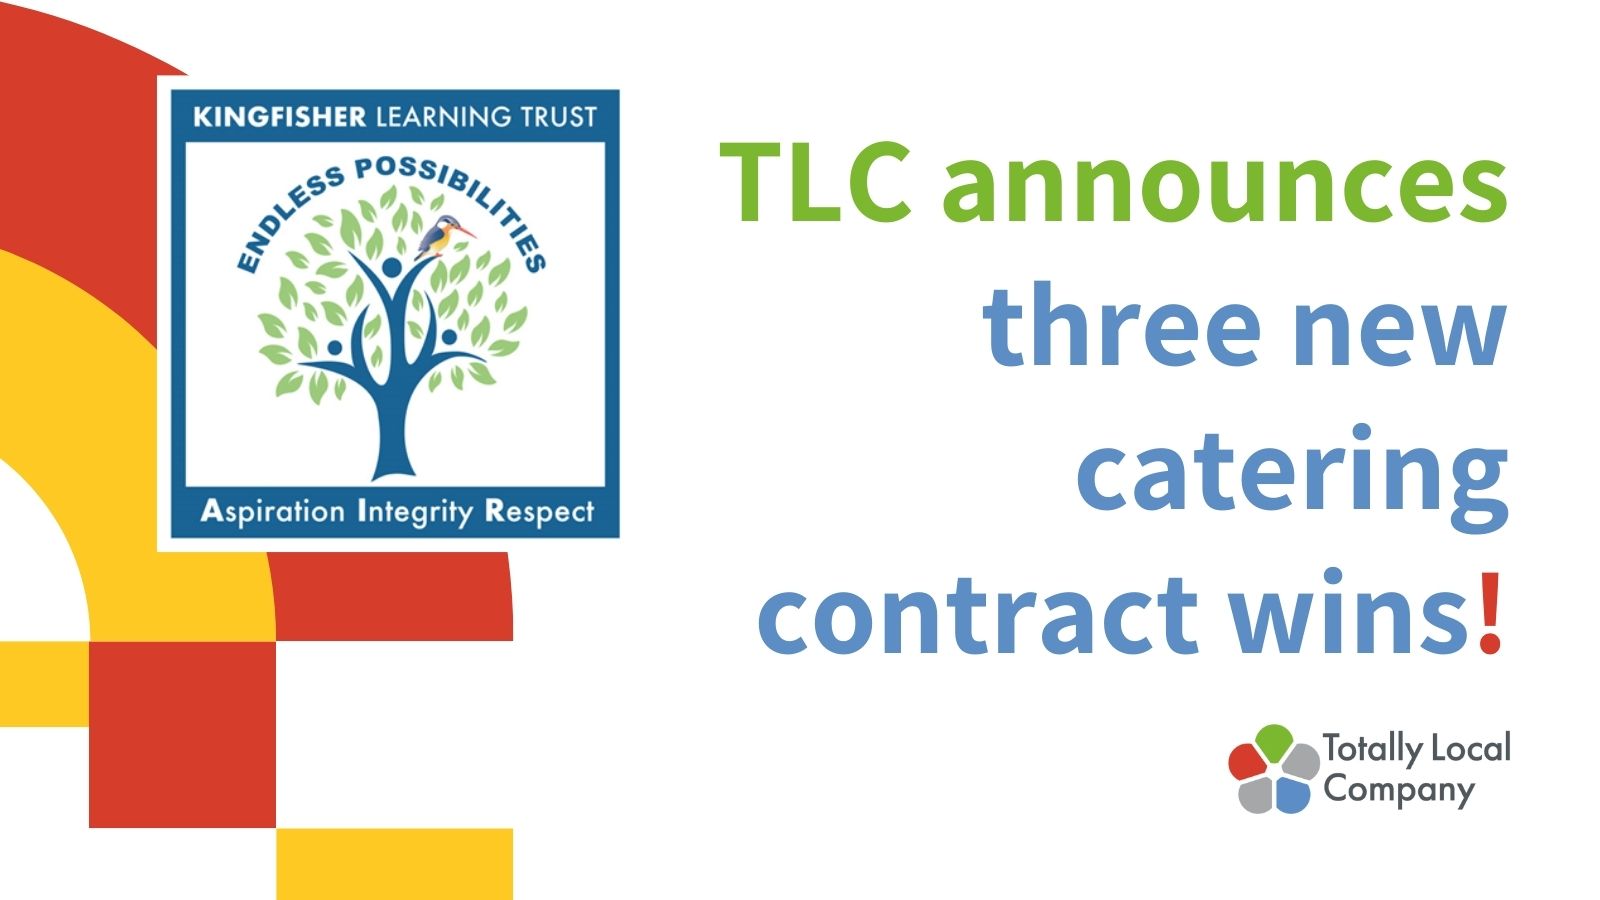 wording - TLC announces three new catering contracts, image - logo of the kingfisher learning trust